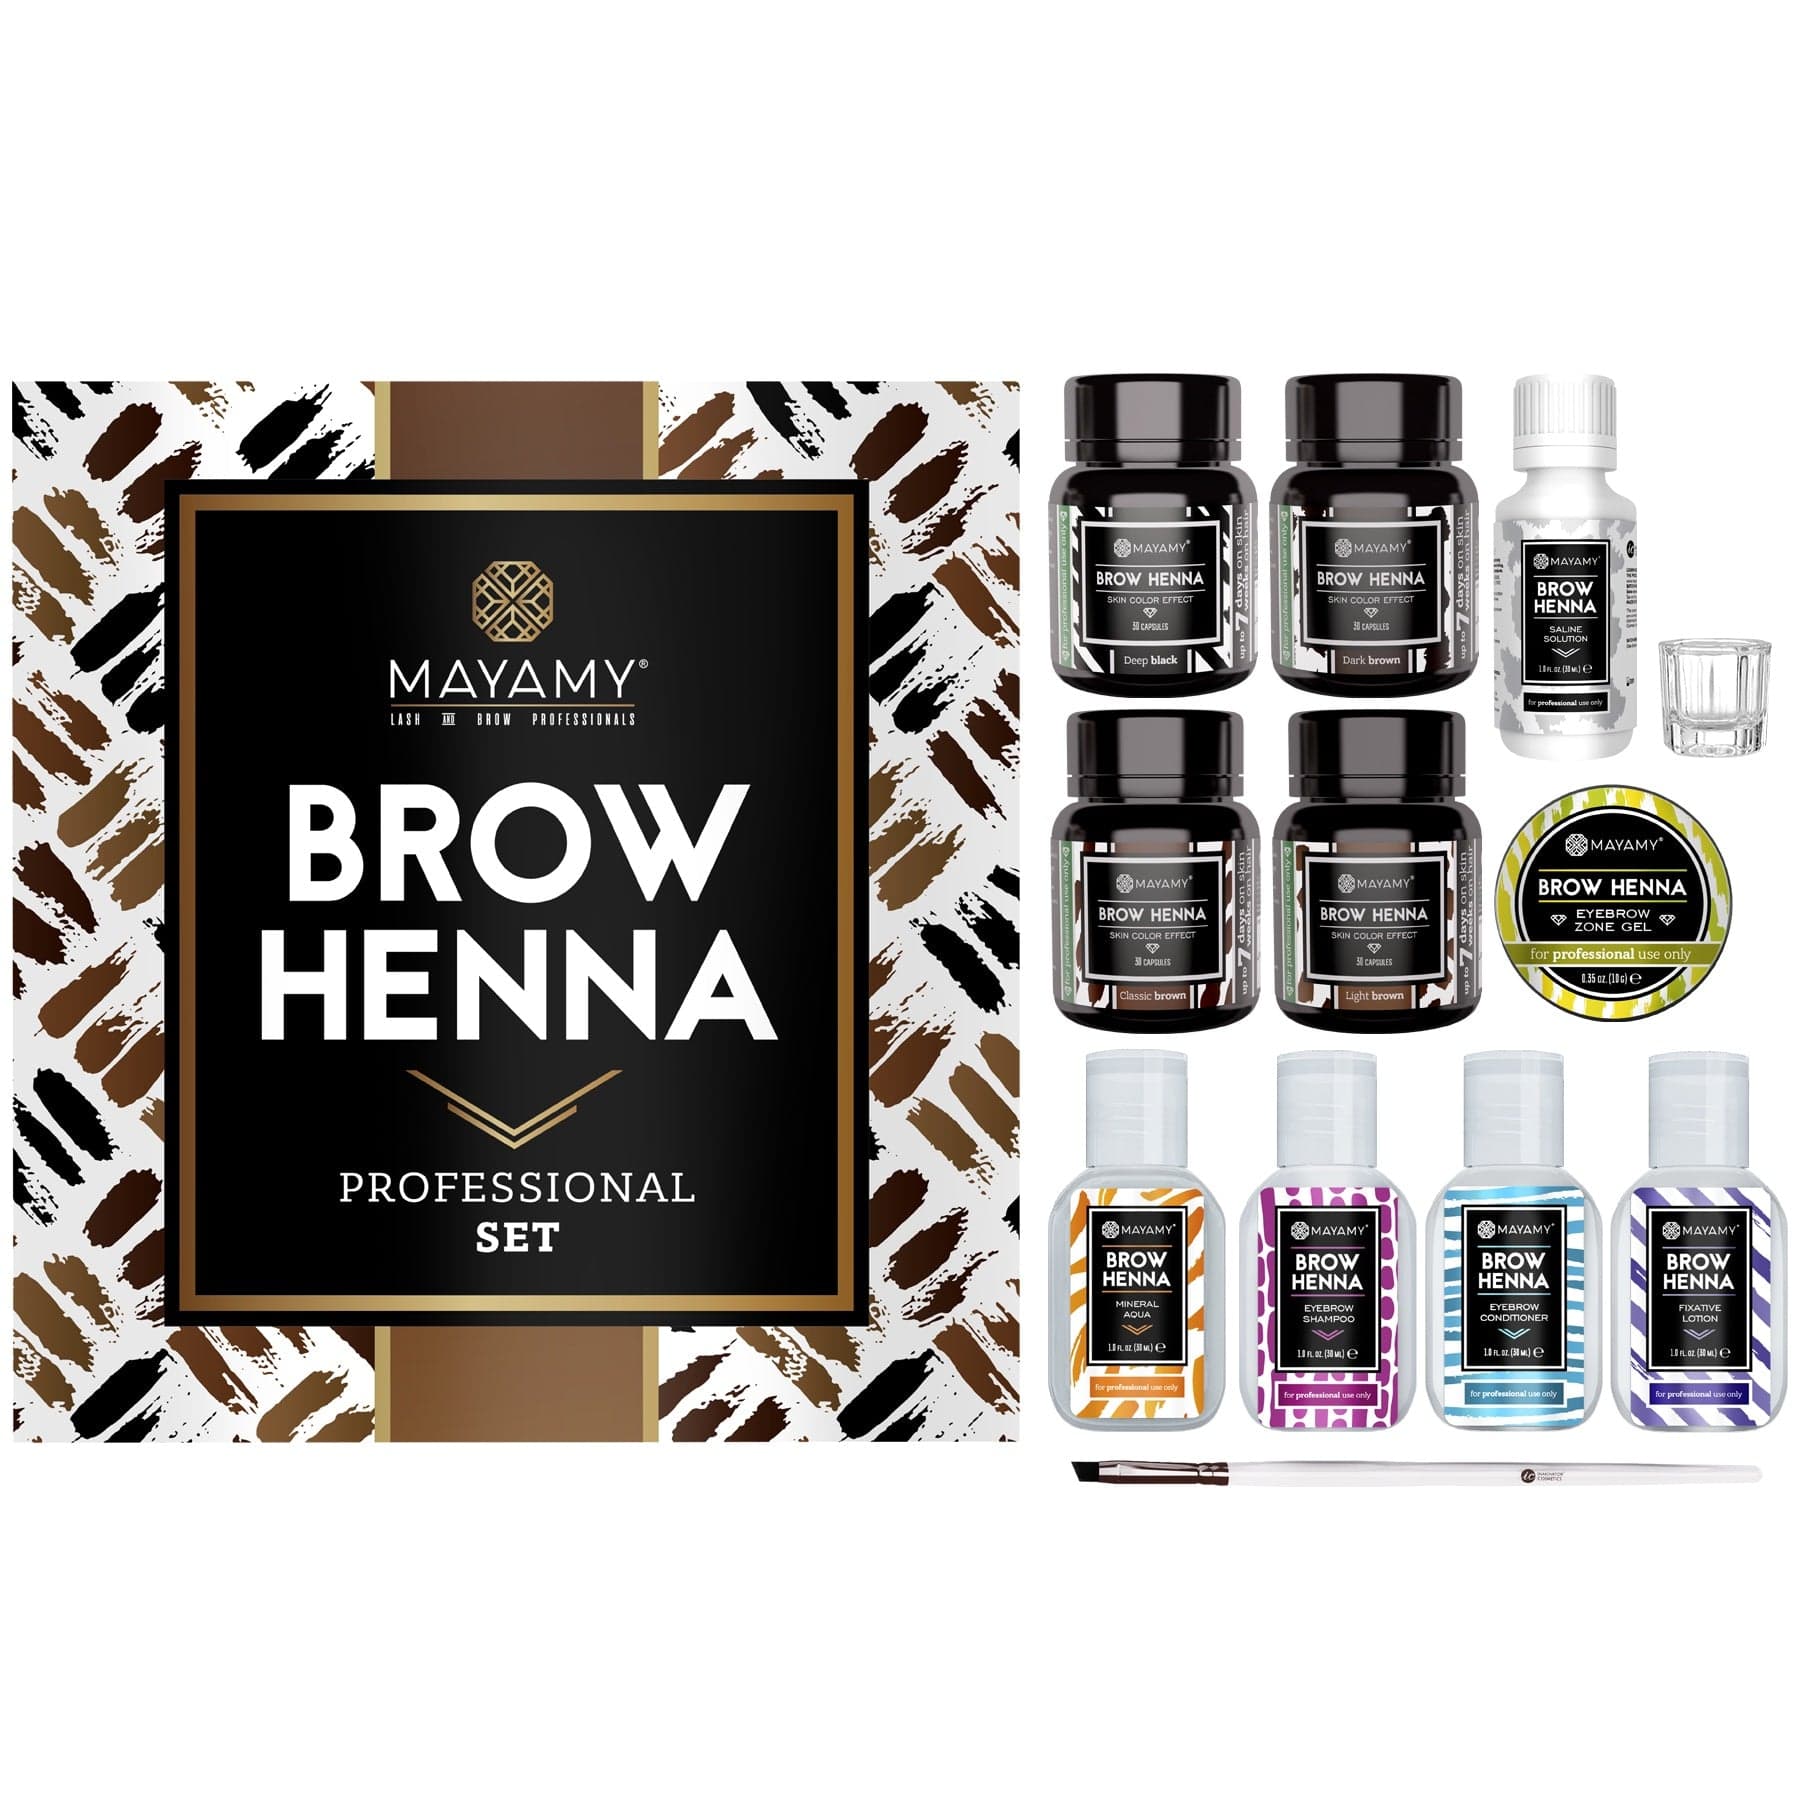 Brow Henna Professional Set Lashes & Brows - Mayamy - Luxe Pacifique